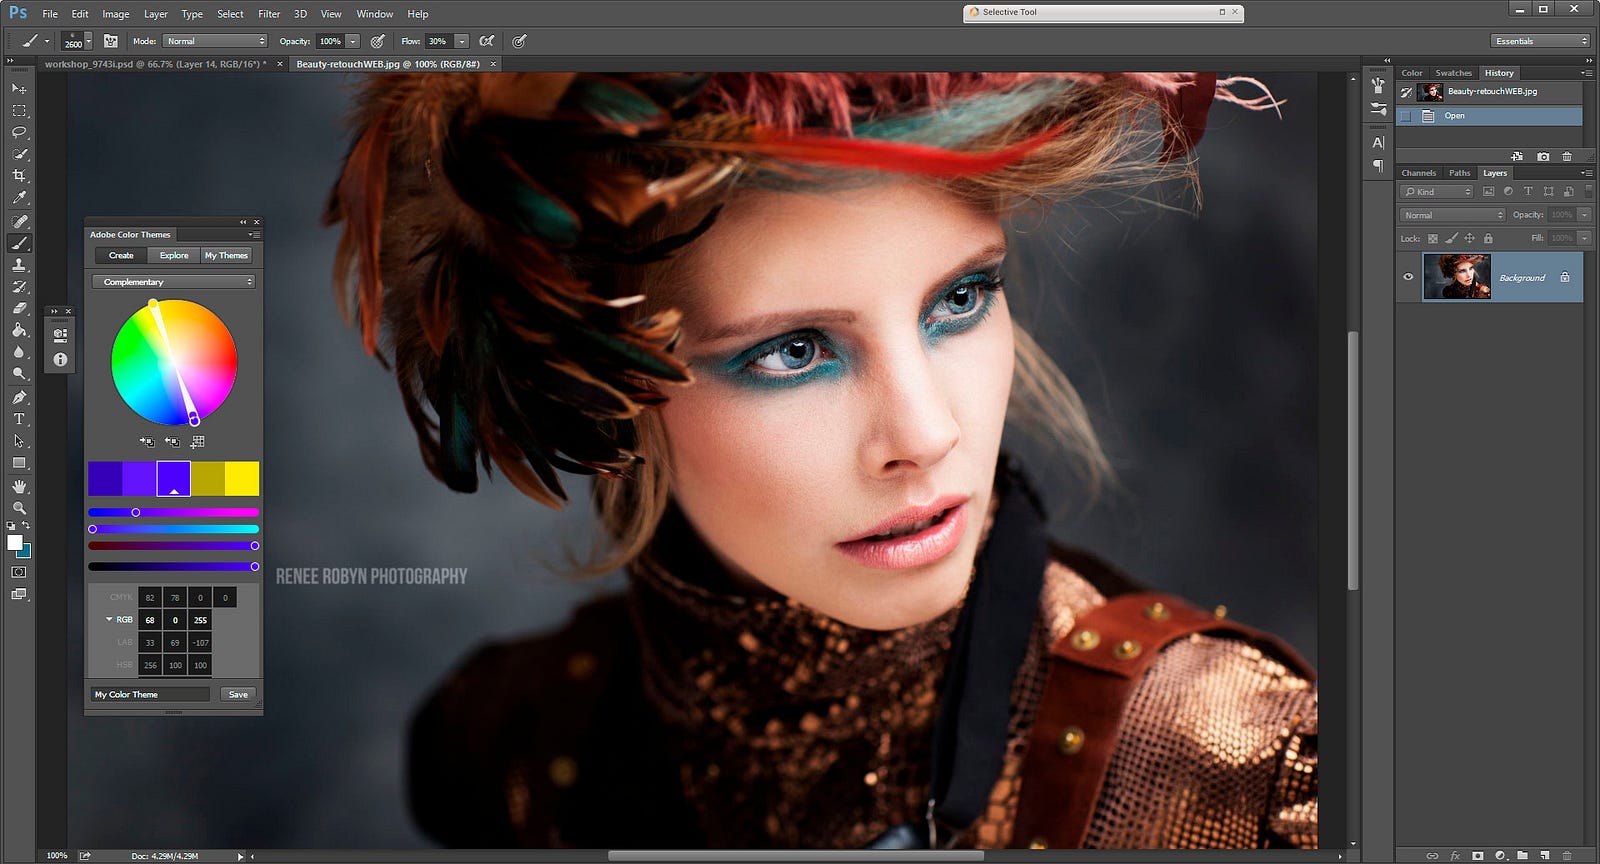 creative photoshop techniques with renee robyn download